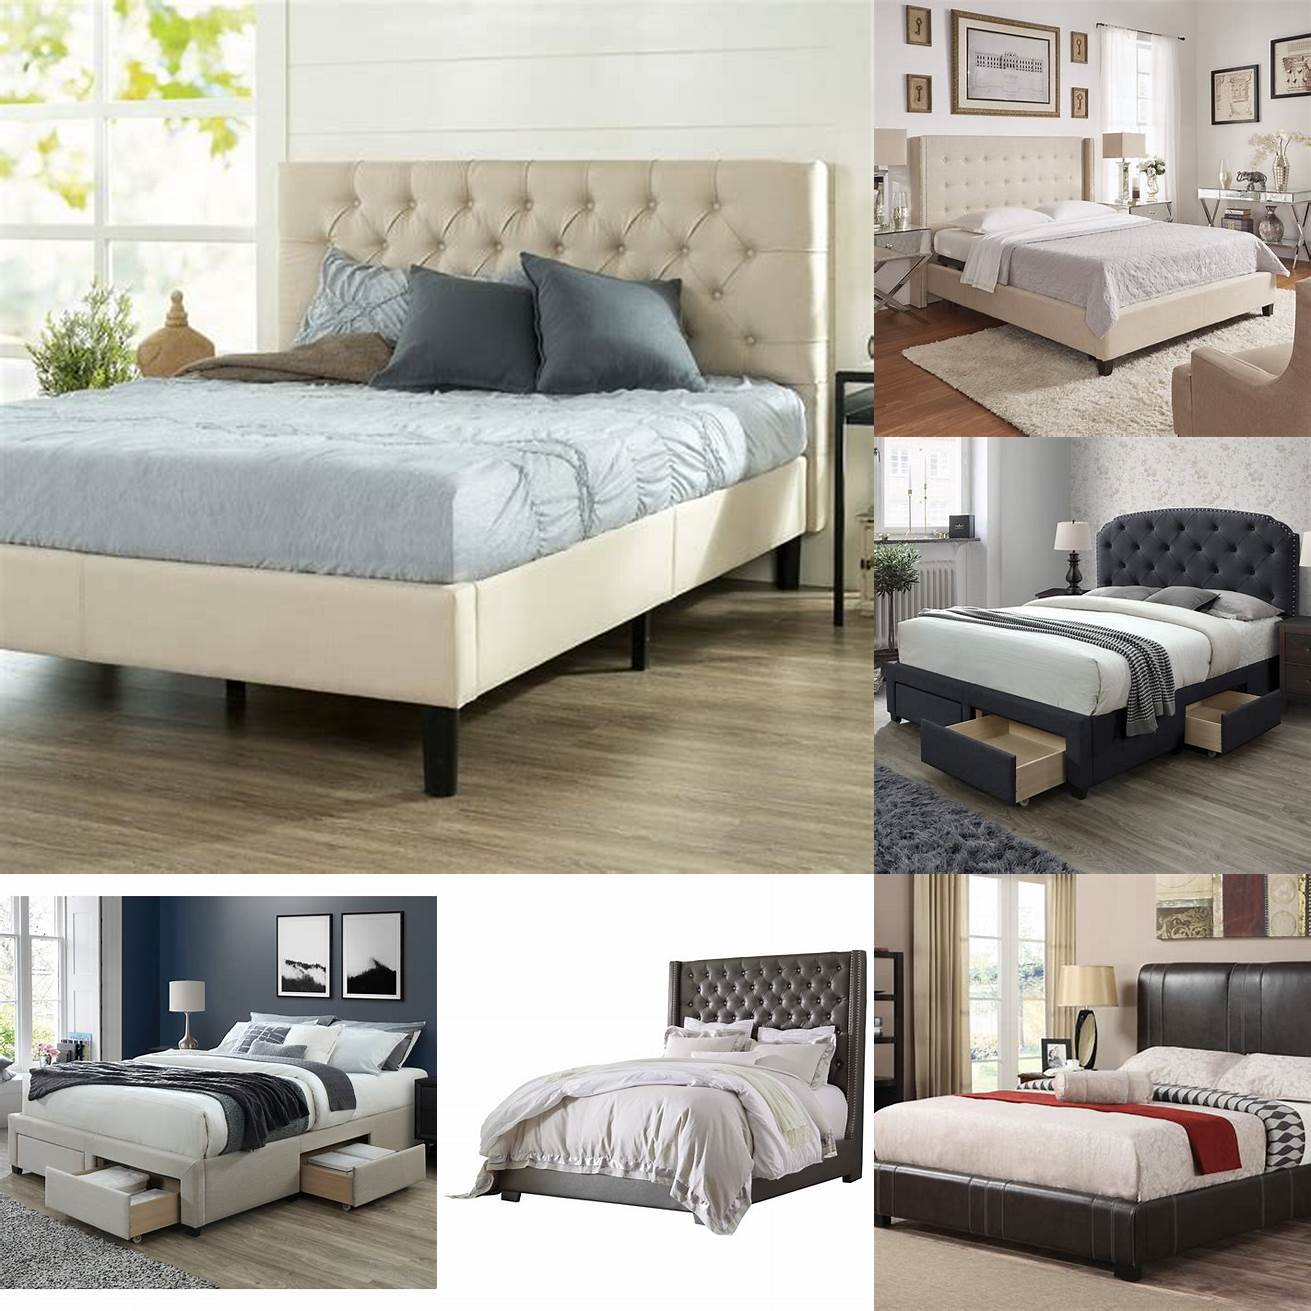 Price - Upholstered beds are often more expensive than other types of beds due to the high-quality materials used in their construction